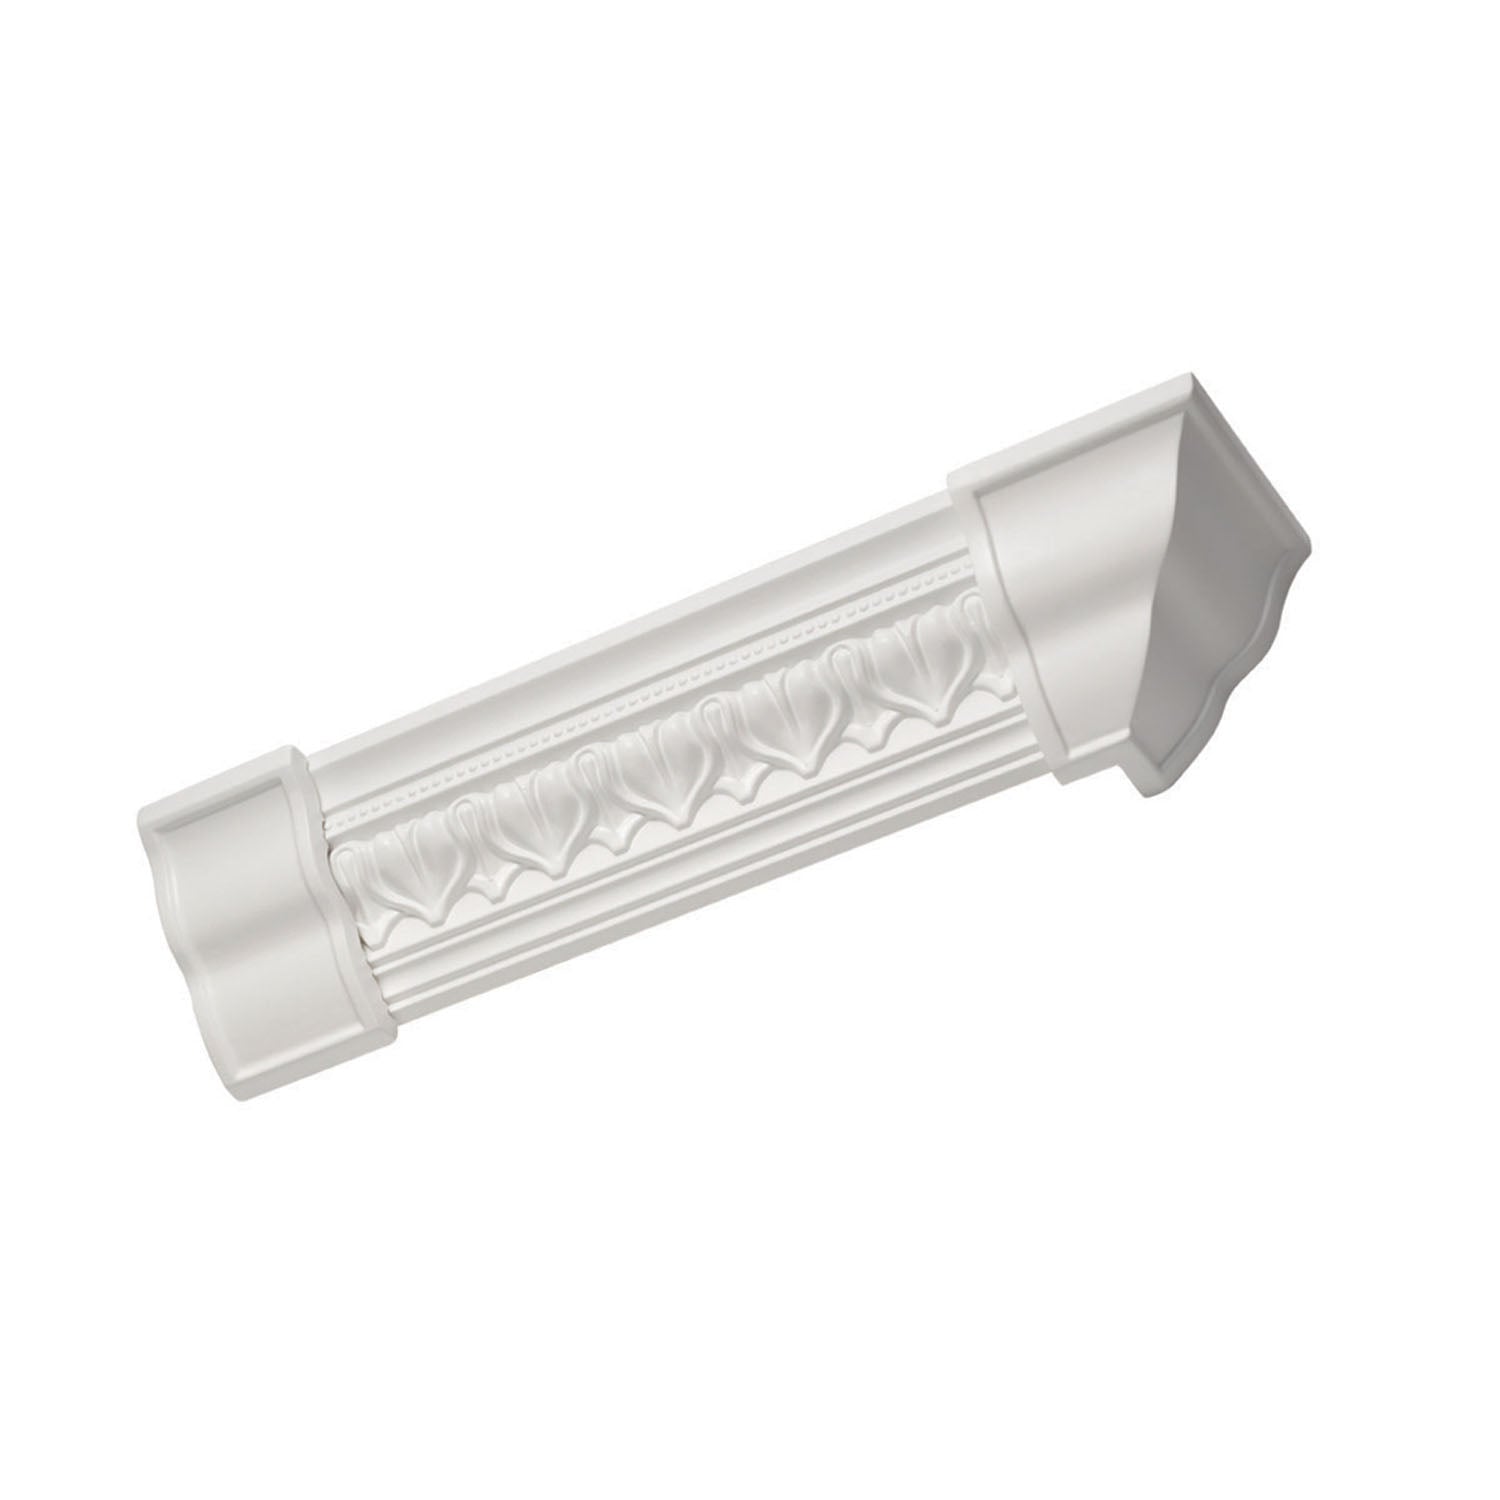 Focal Point Lighting 22253 Accessories Acropolis Connector - 4 1/8 Decor White